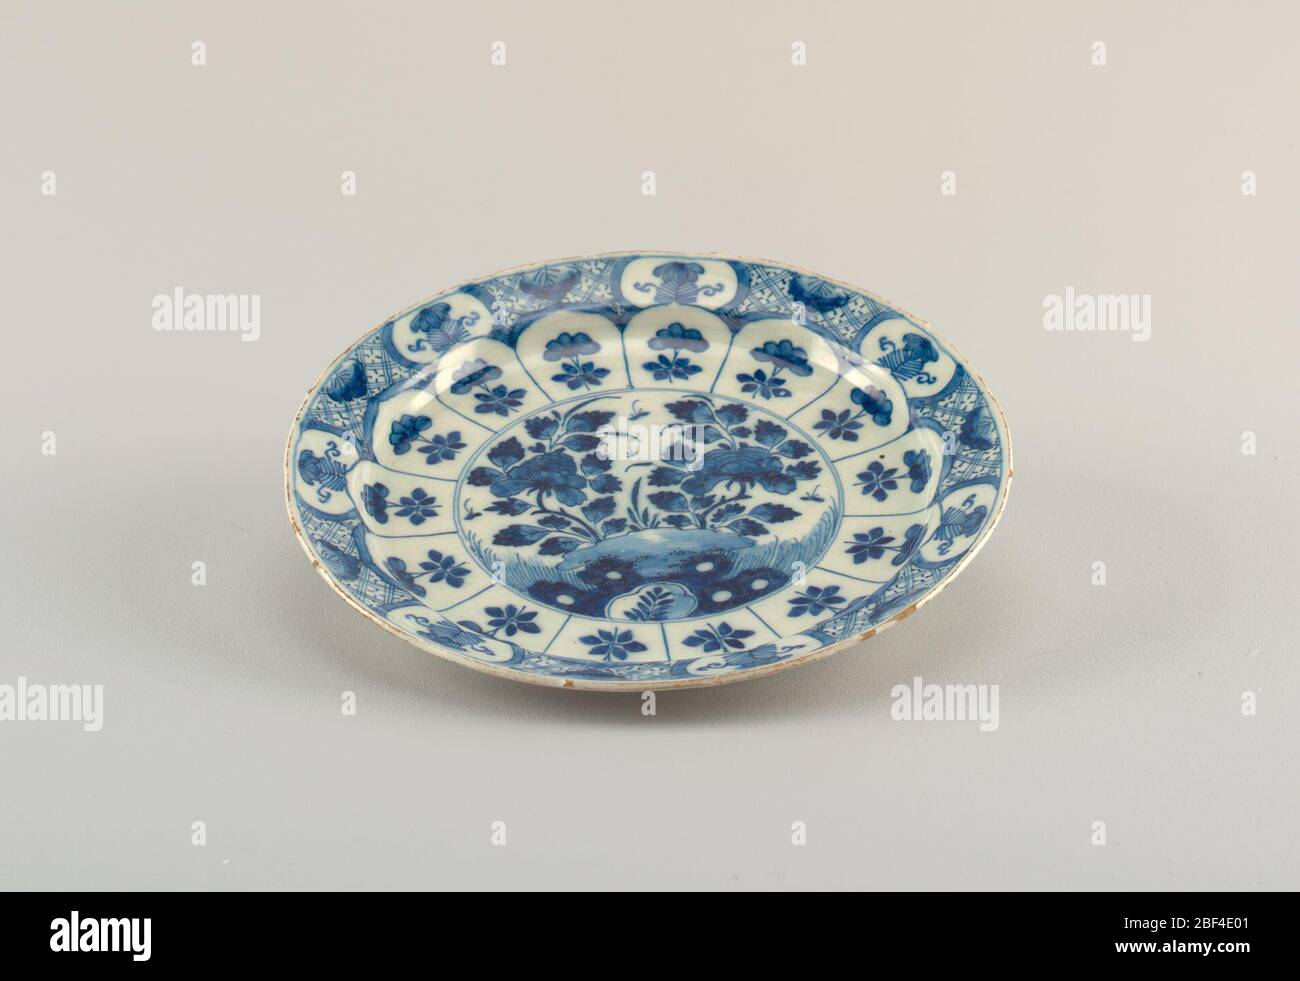 Plate. Circular plate painted in underglaze blue on white; center with chinoiserie scene of flowers, rocks, insects; on cavetto with 14 uniform panels with flowers; around rim with evenly-spaced reserves of floral motifs on diaper pattern; bottom, low foot rim, 7 gro Stock Photo